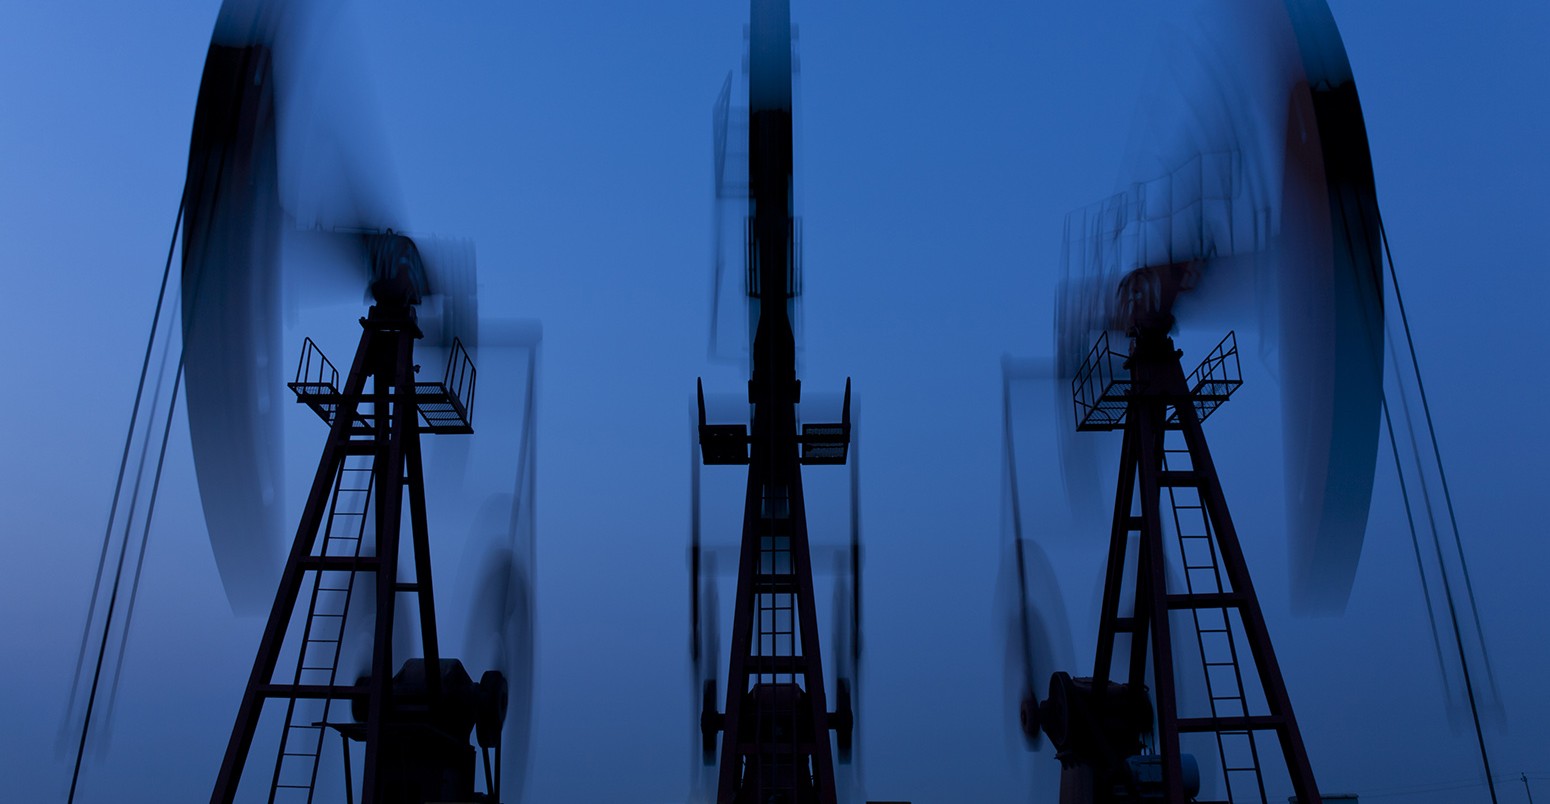 Working oil pumps in silhouette at night.